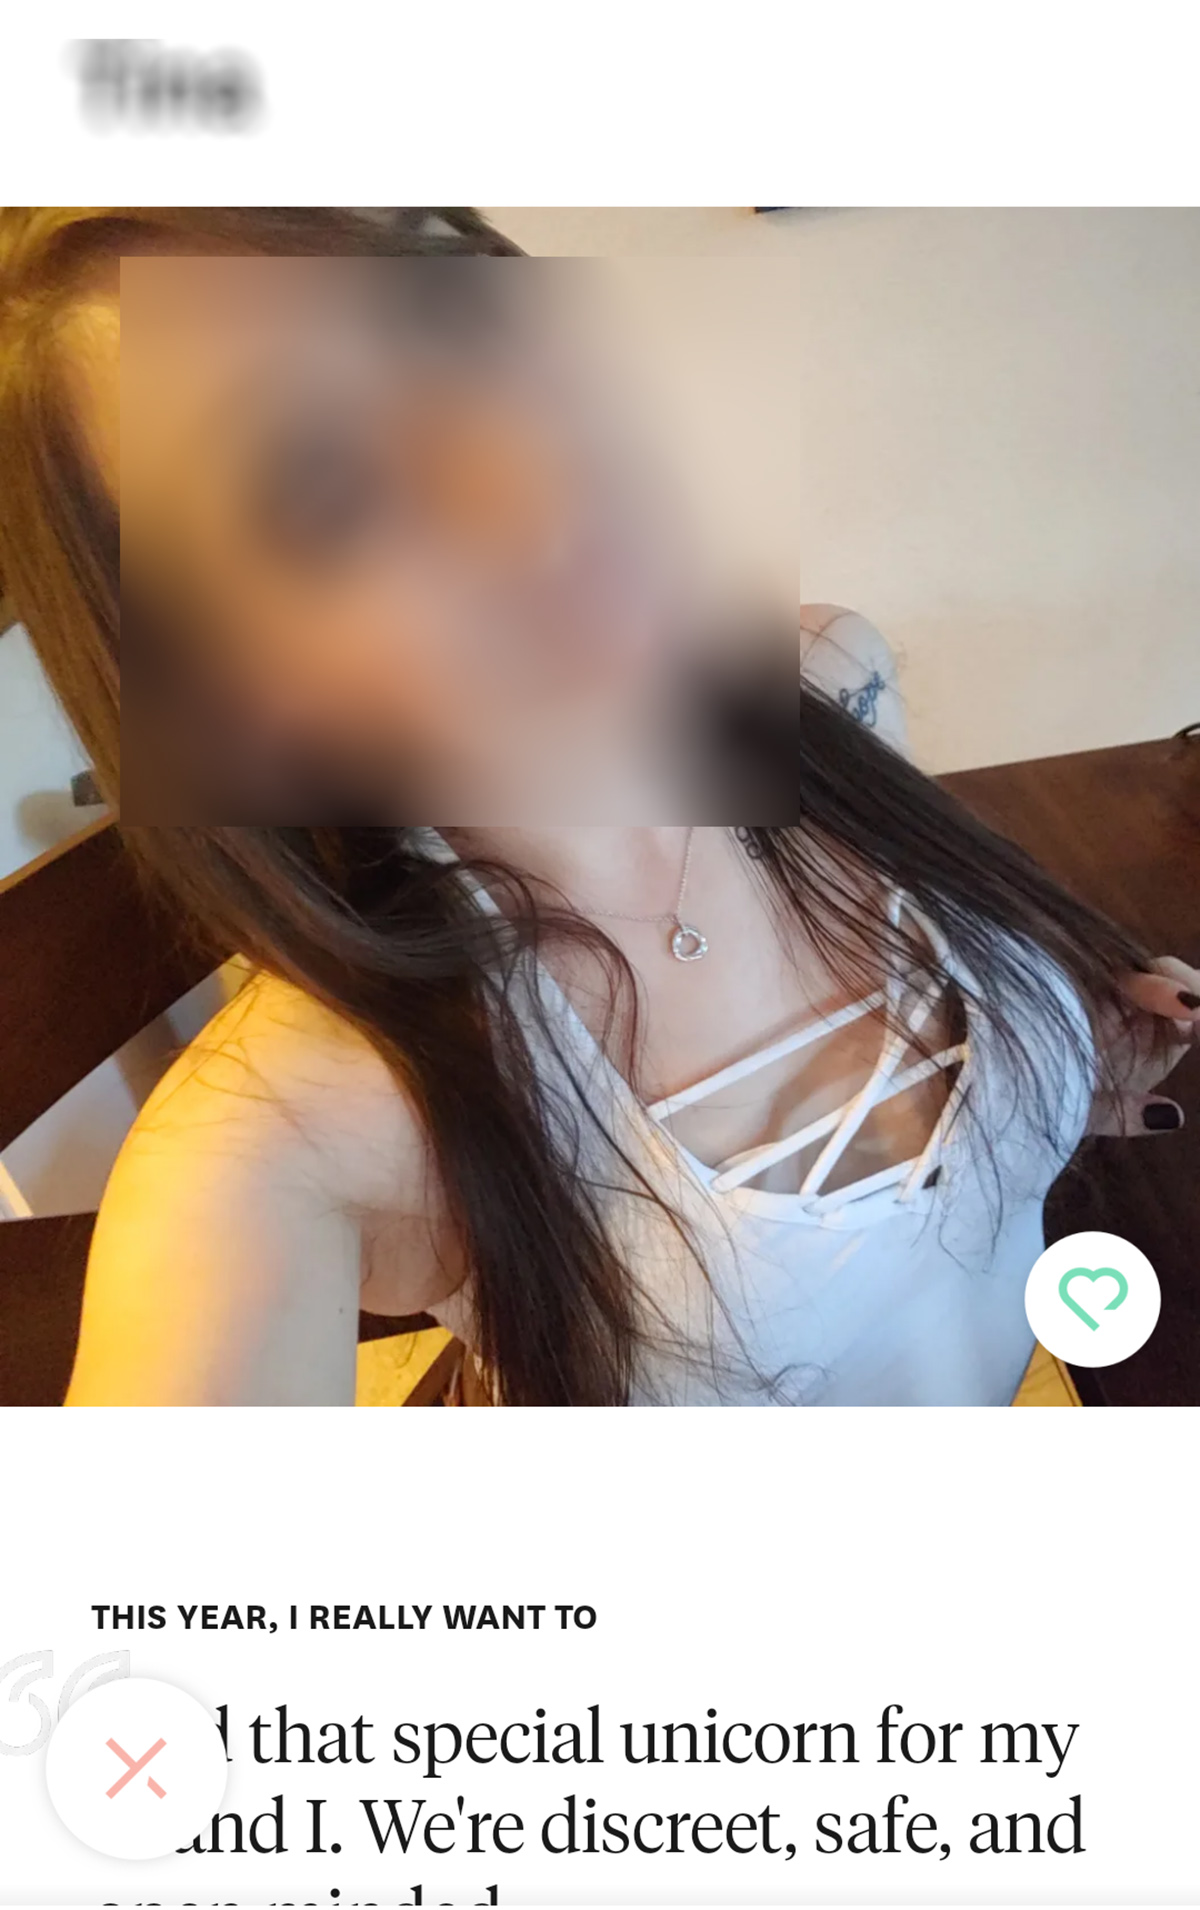 Totally free bbw dating